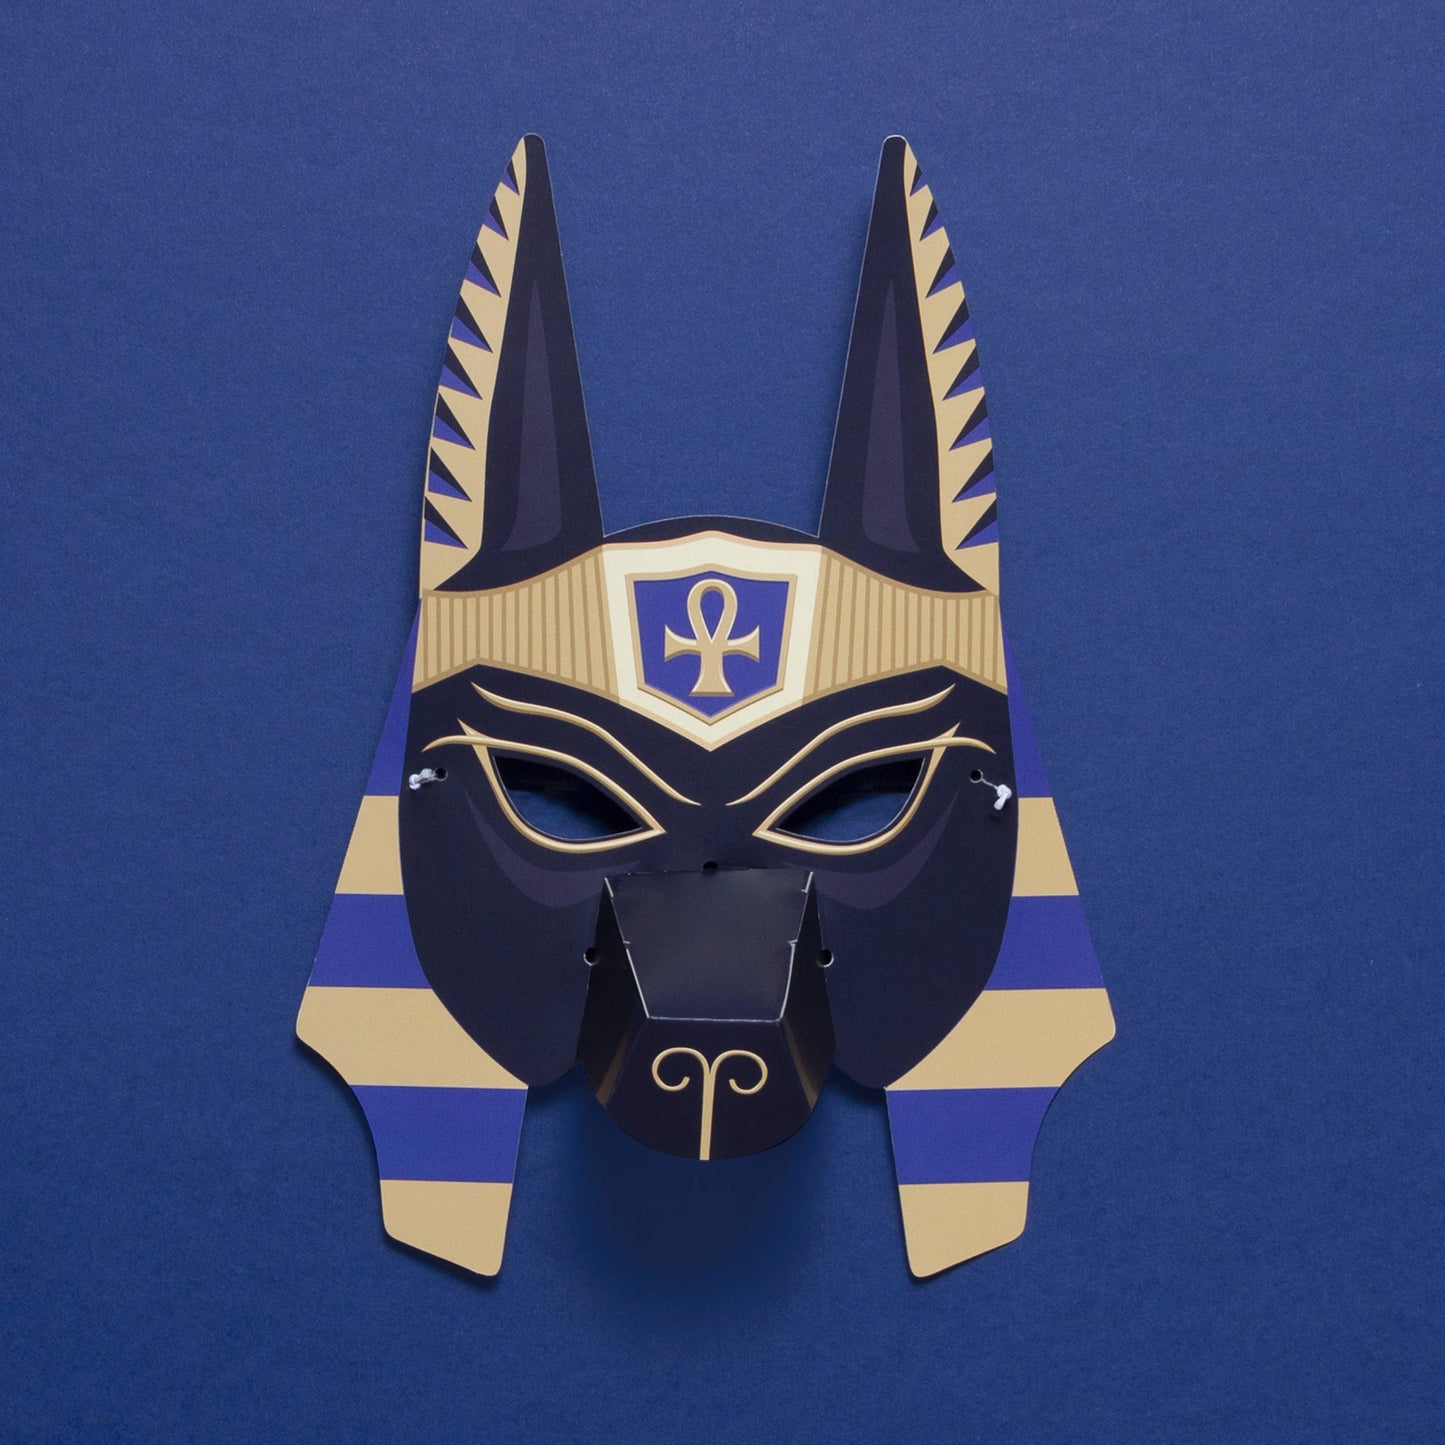 Load image into Gallery viewer, Anubis jackal mask with long pointy ears and seen against a blue background.
